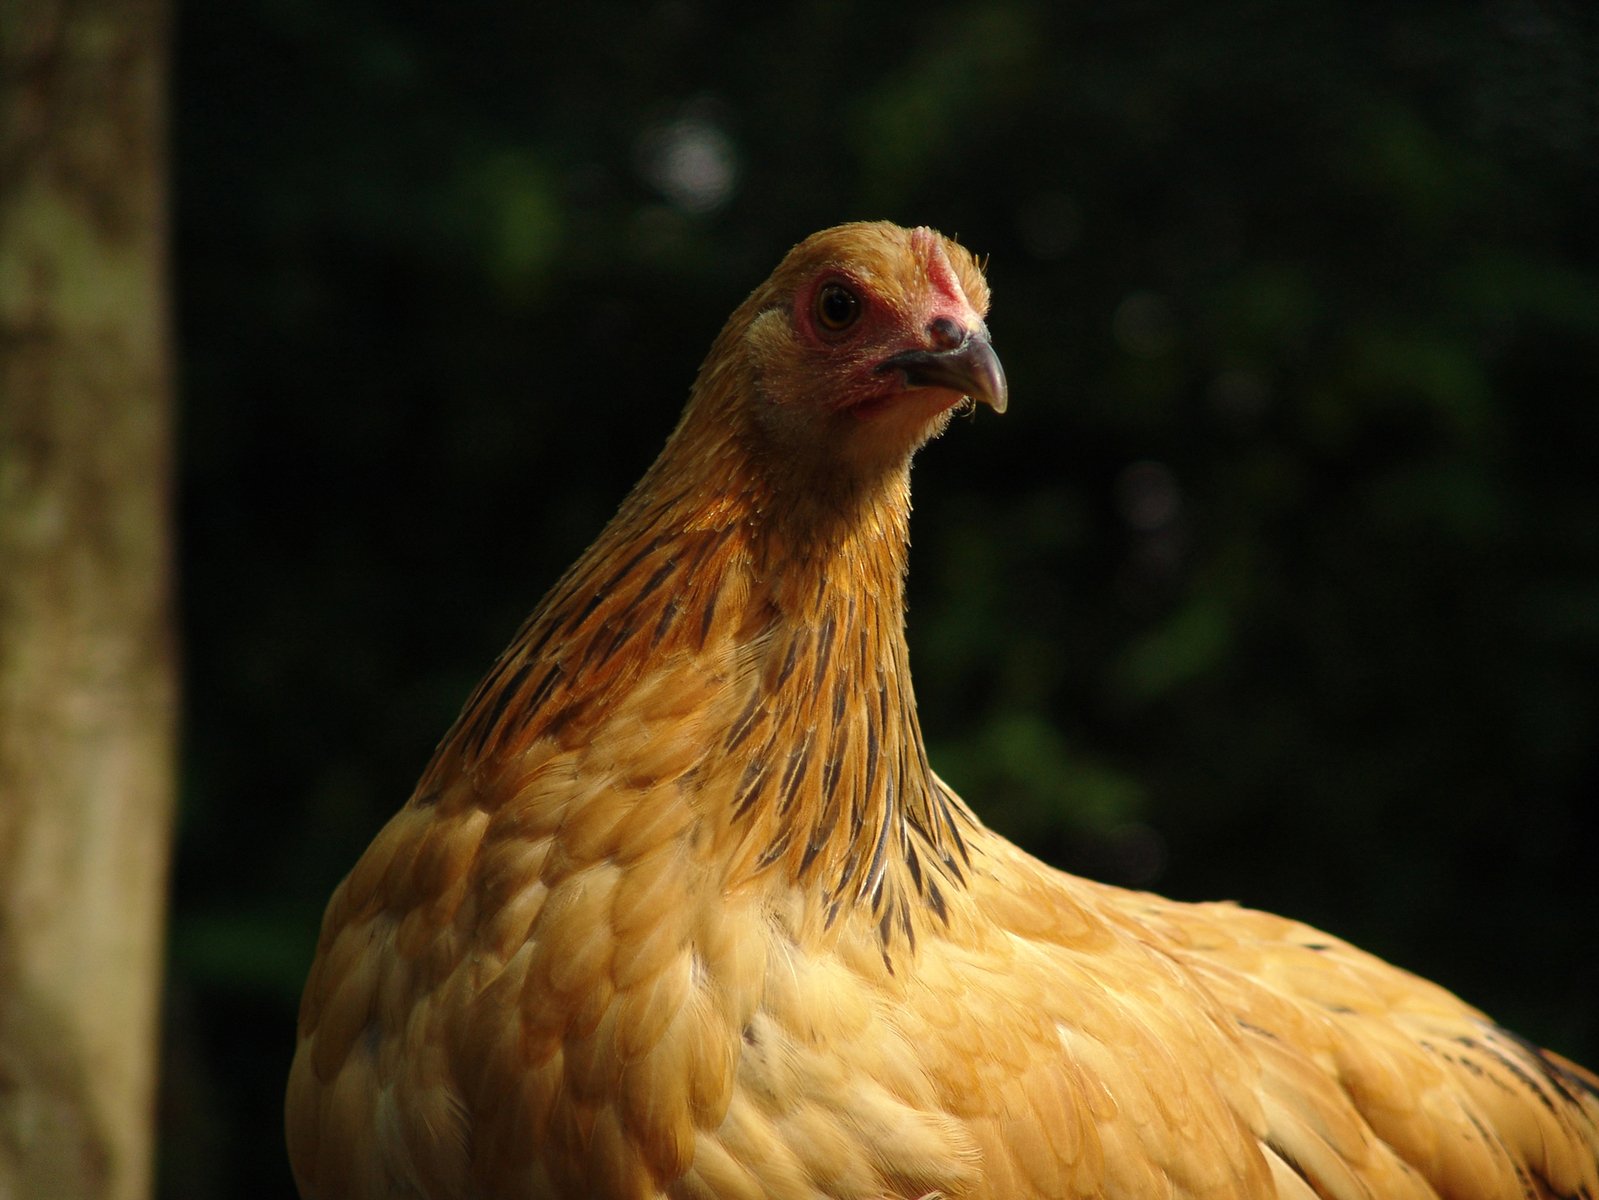 a close up image of a yellow rooster